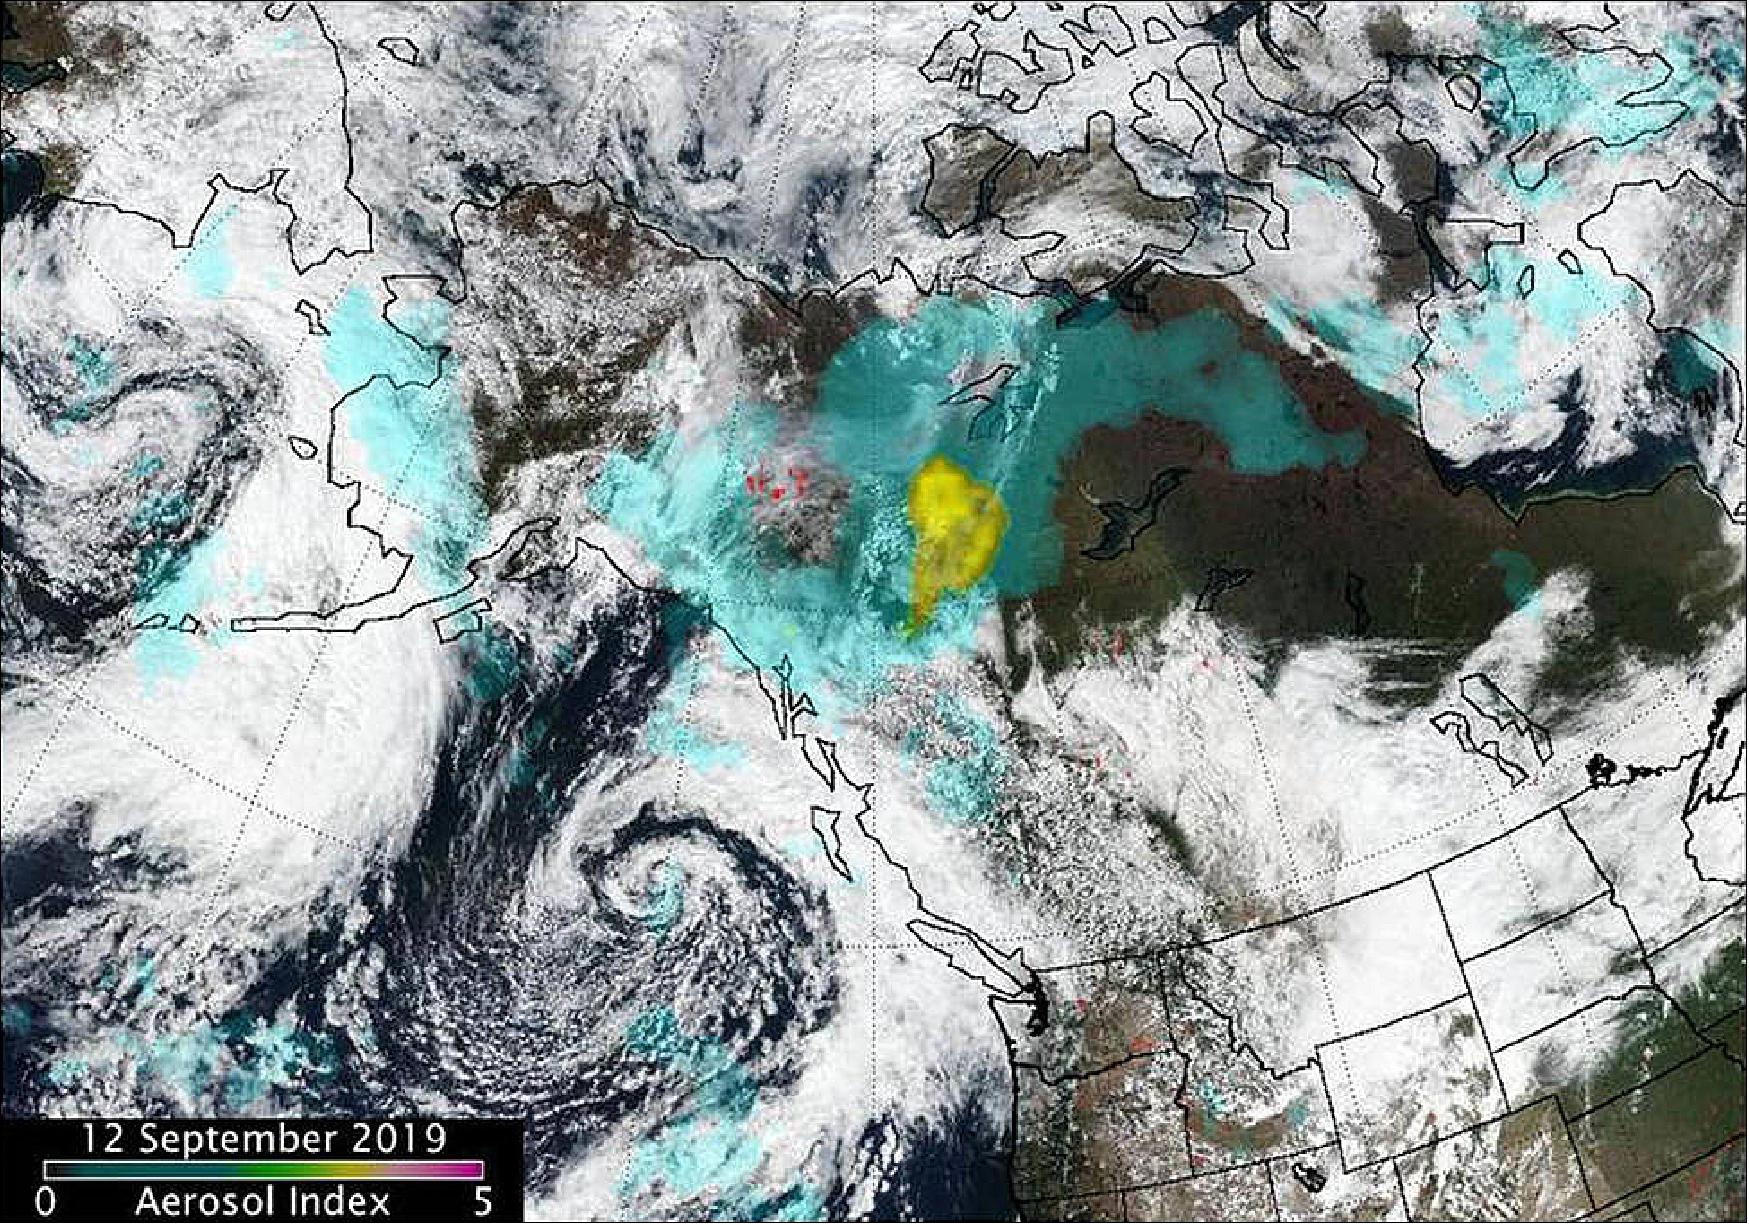 Figure 37: In North America, Suomi-NPP’s OMPS detected smoke and aerosols from fires over Canada’s Yukon Territories. Aerosol concentrations were very high over the Yukon fires due to a pyrocumulus event that occurred on 11 September. In the image, there is also light brown area of smoke that looks like a letter “C” on its side. The image also shows a low pressure system (the area of spiraled clouds) off the coast of western Canada (image credit: NASA/NOAA, Colin Seftor)